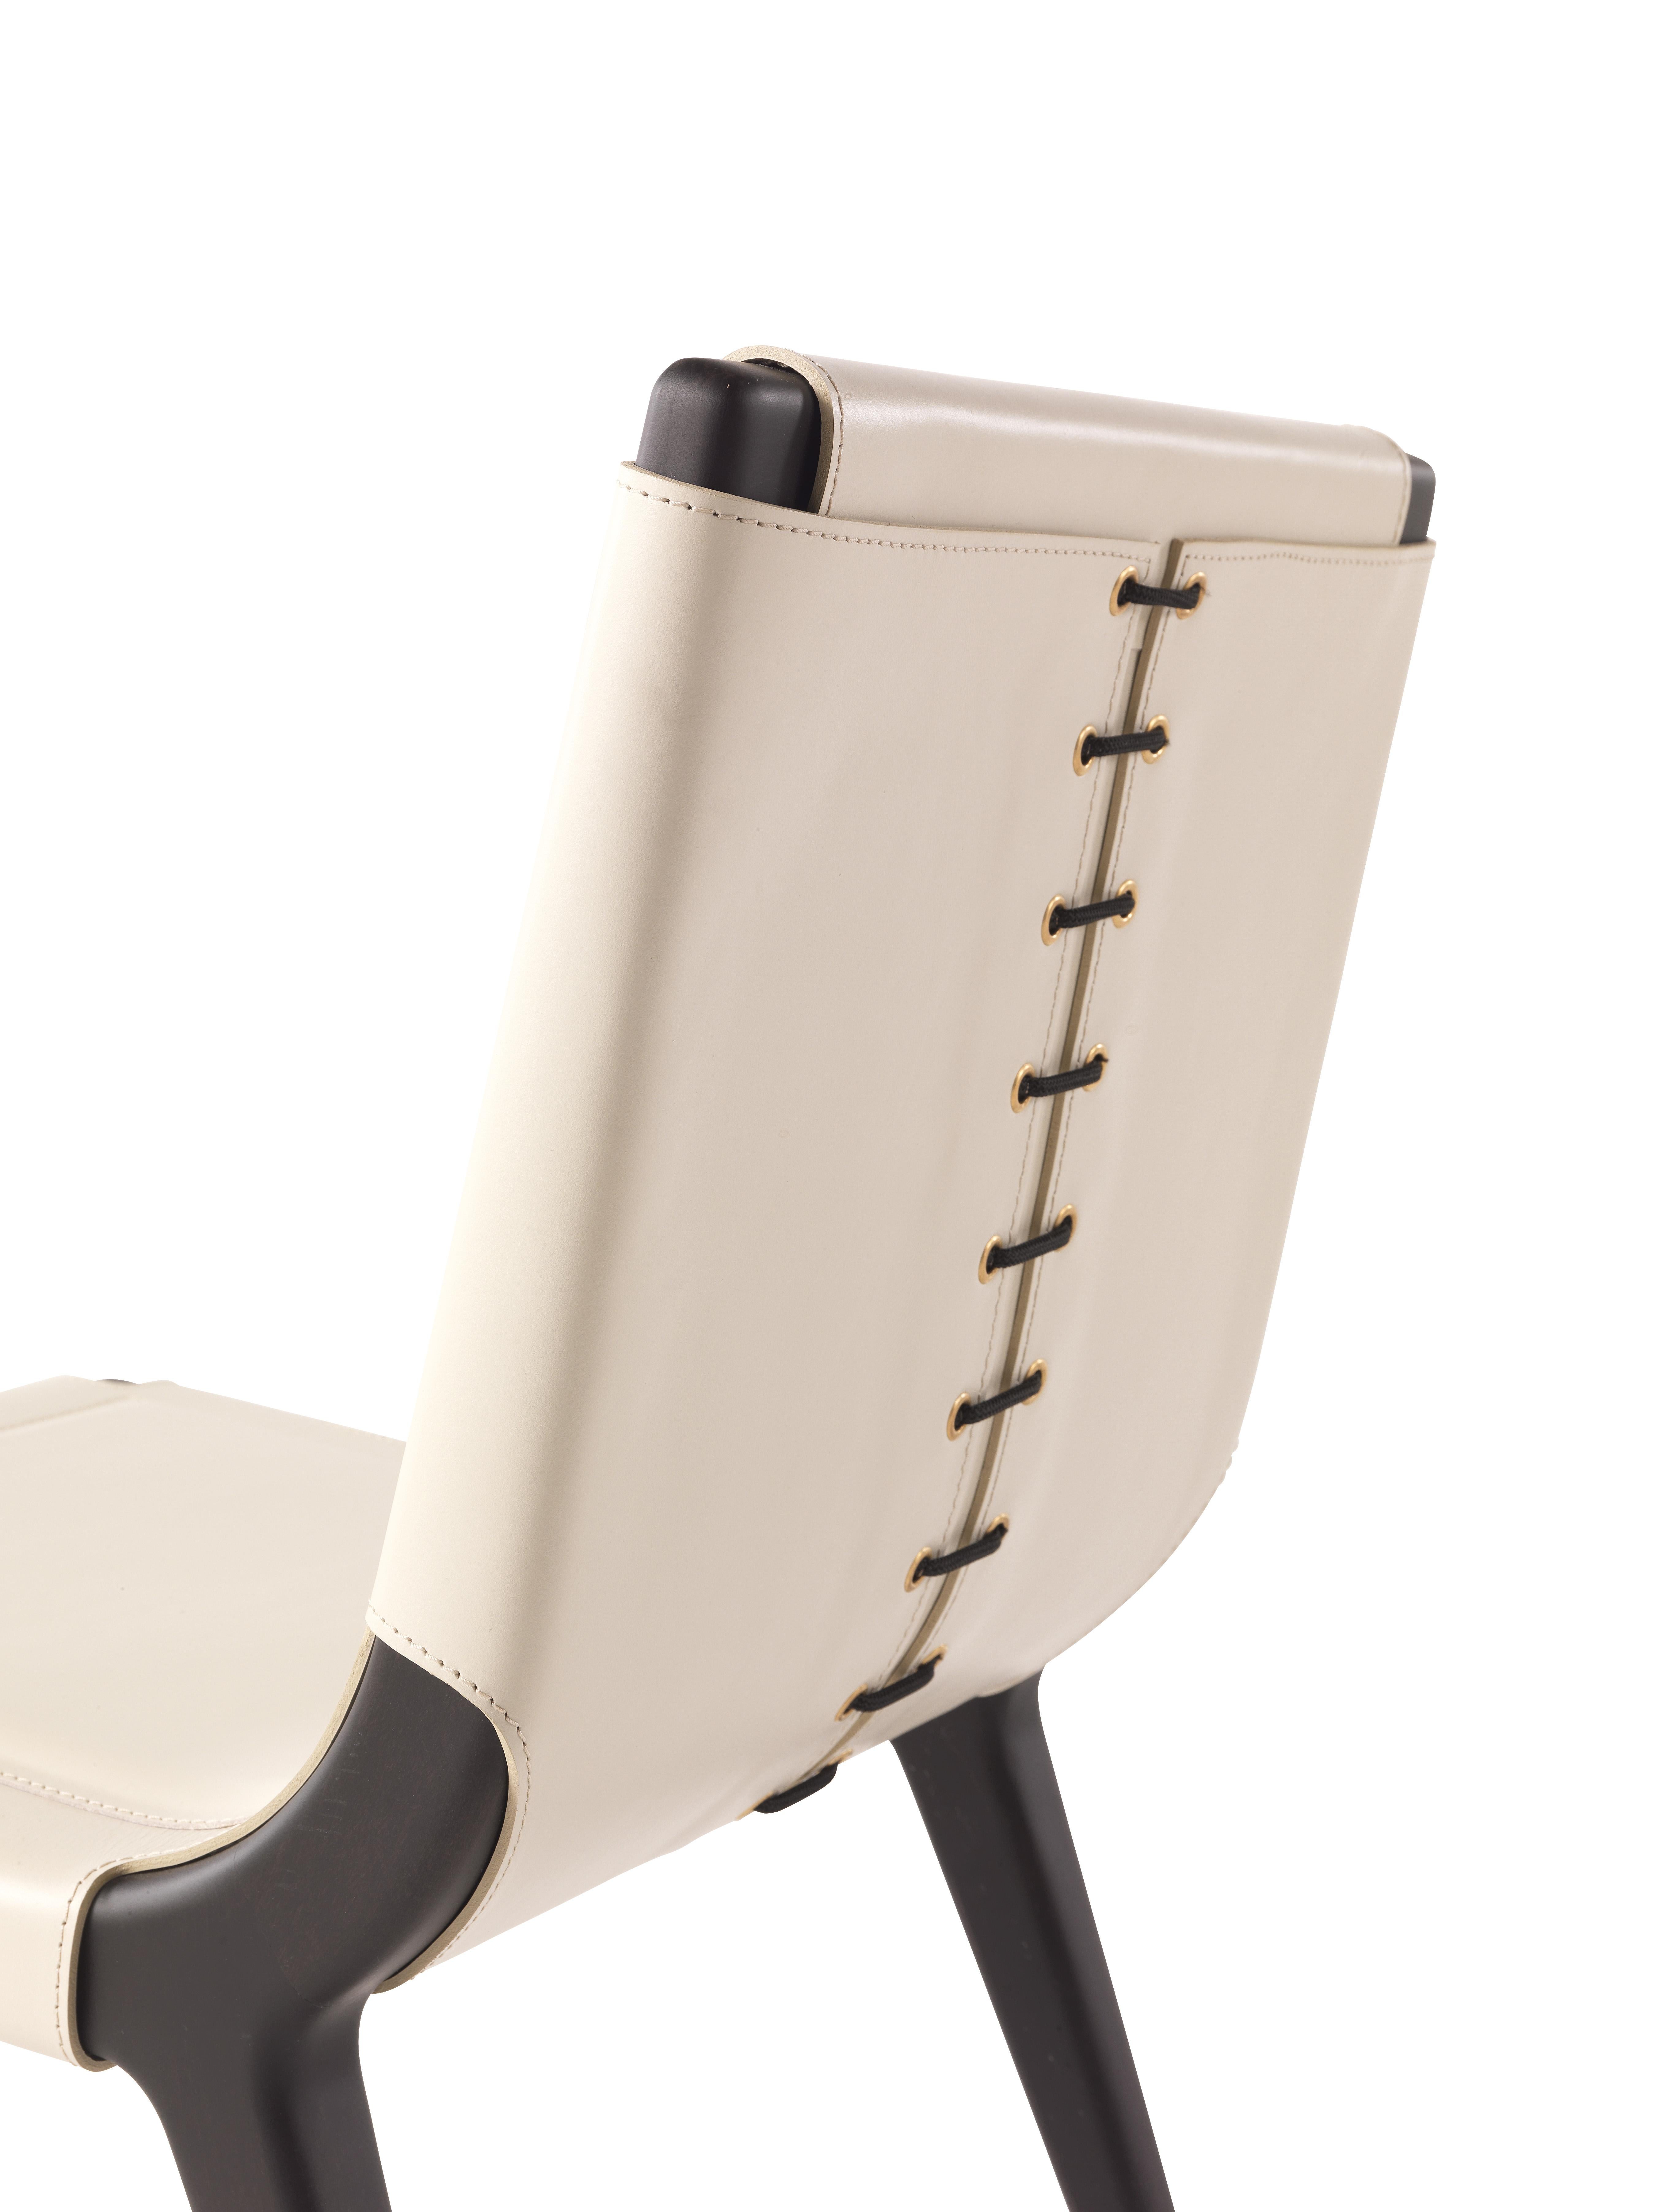 Contemporary 21st Century Dinka Chair in Leather Col. Milk by Etro Home Interiors For Sale